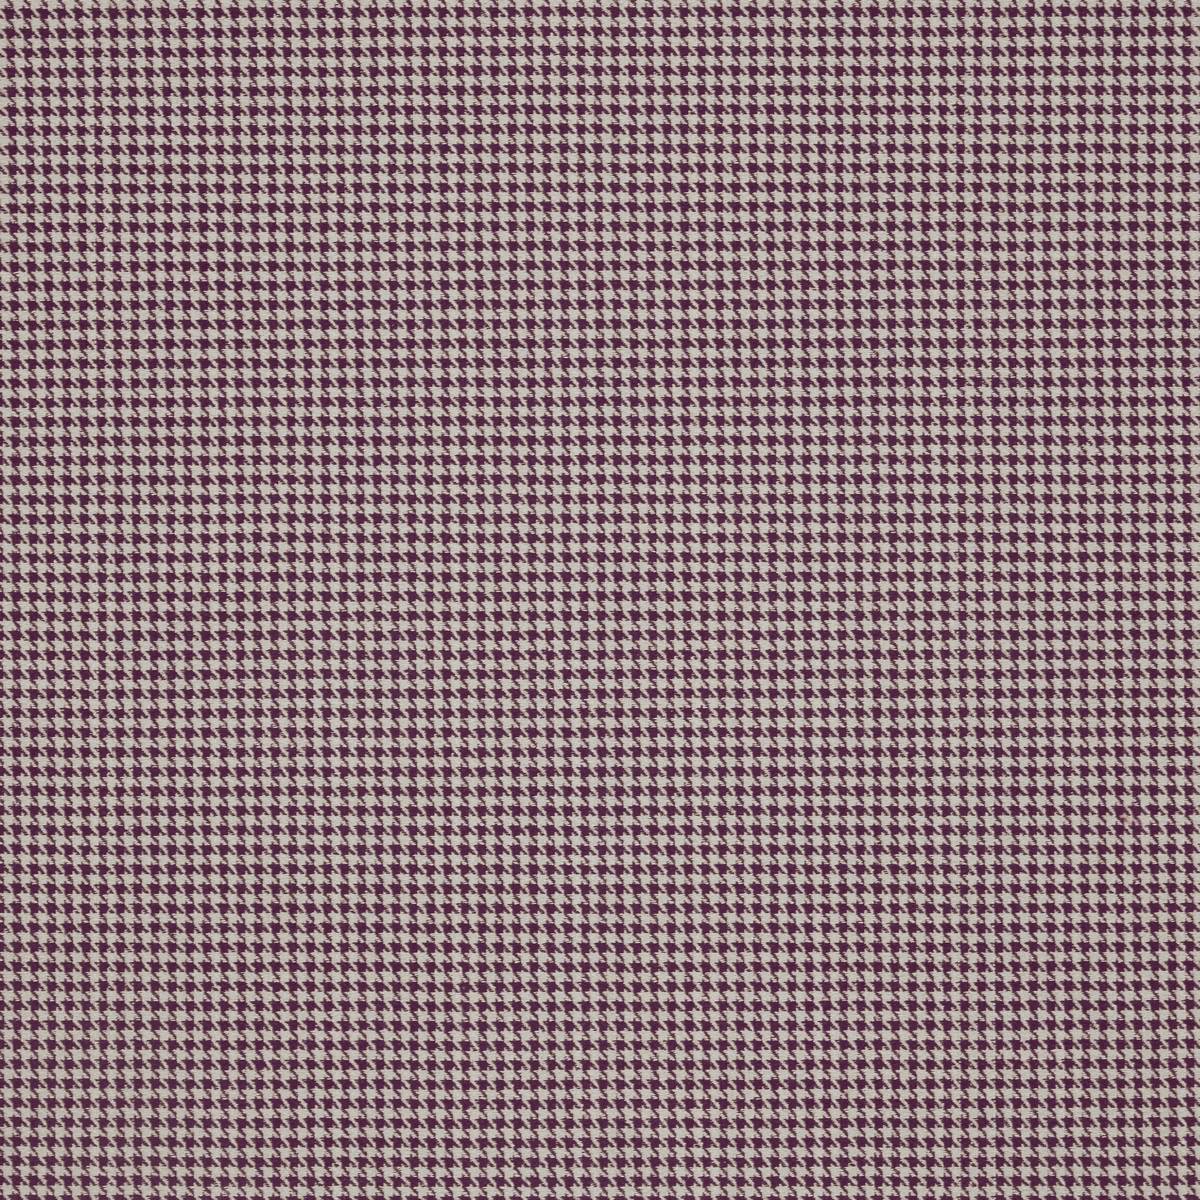 Houndstooth Mulberry Fabric by iLiv